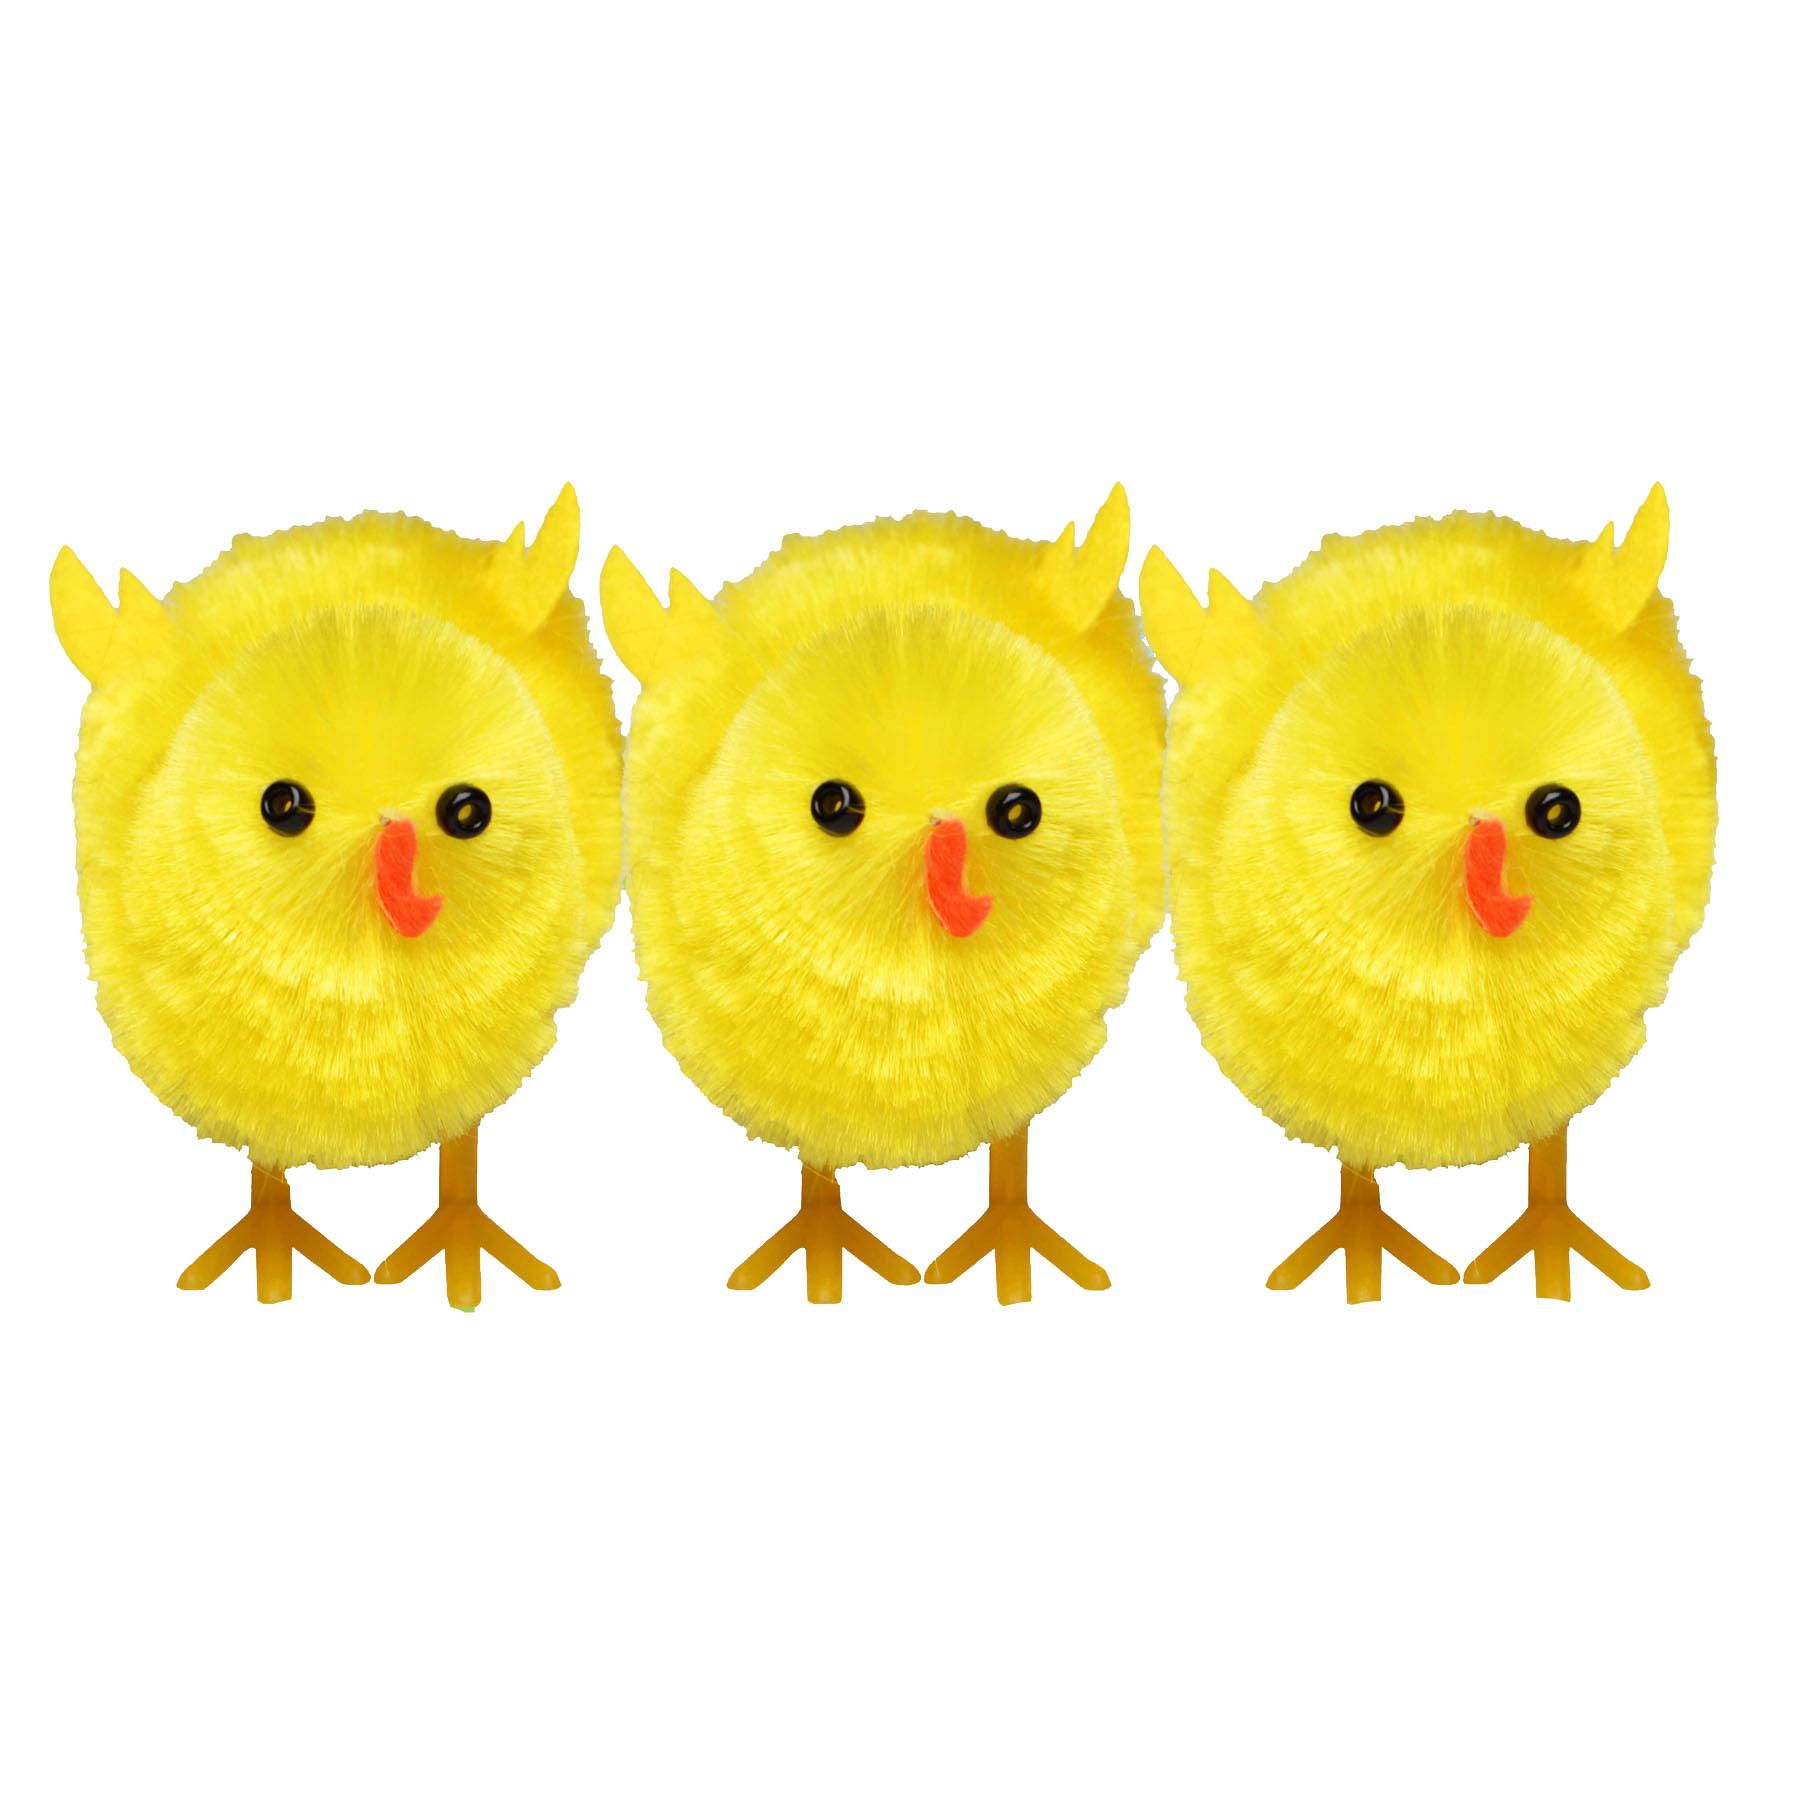 Easter Decorations, Bonnet Making, Arts and Crafts - 3 Pack 5cm Chicks